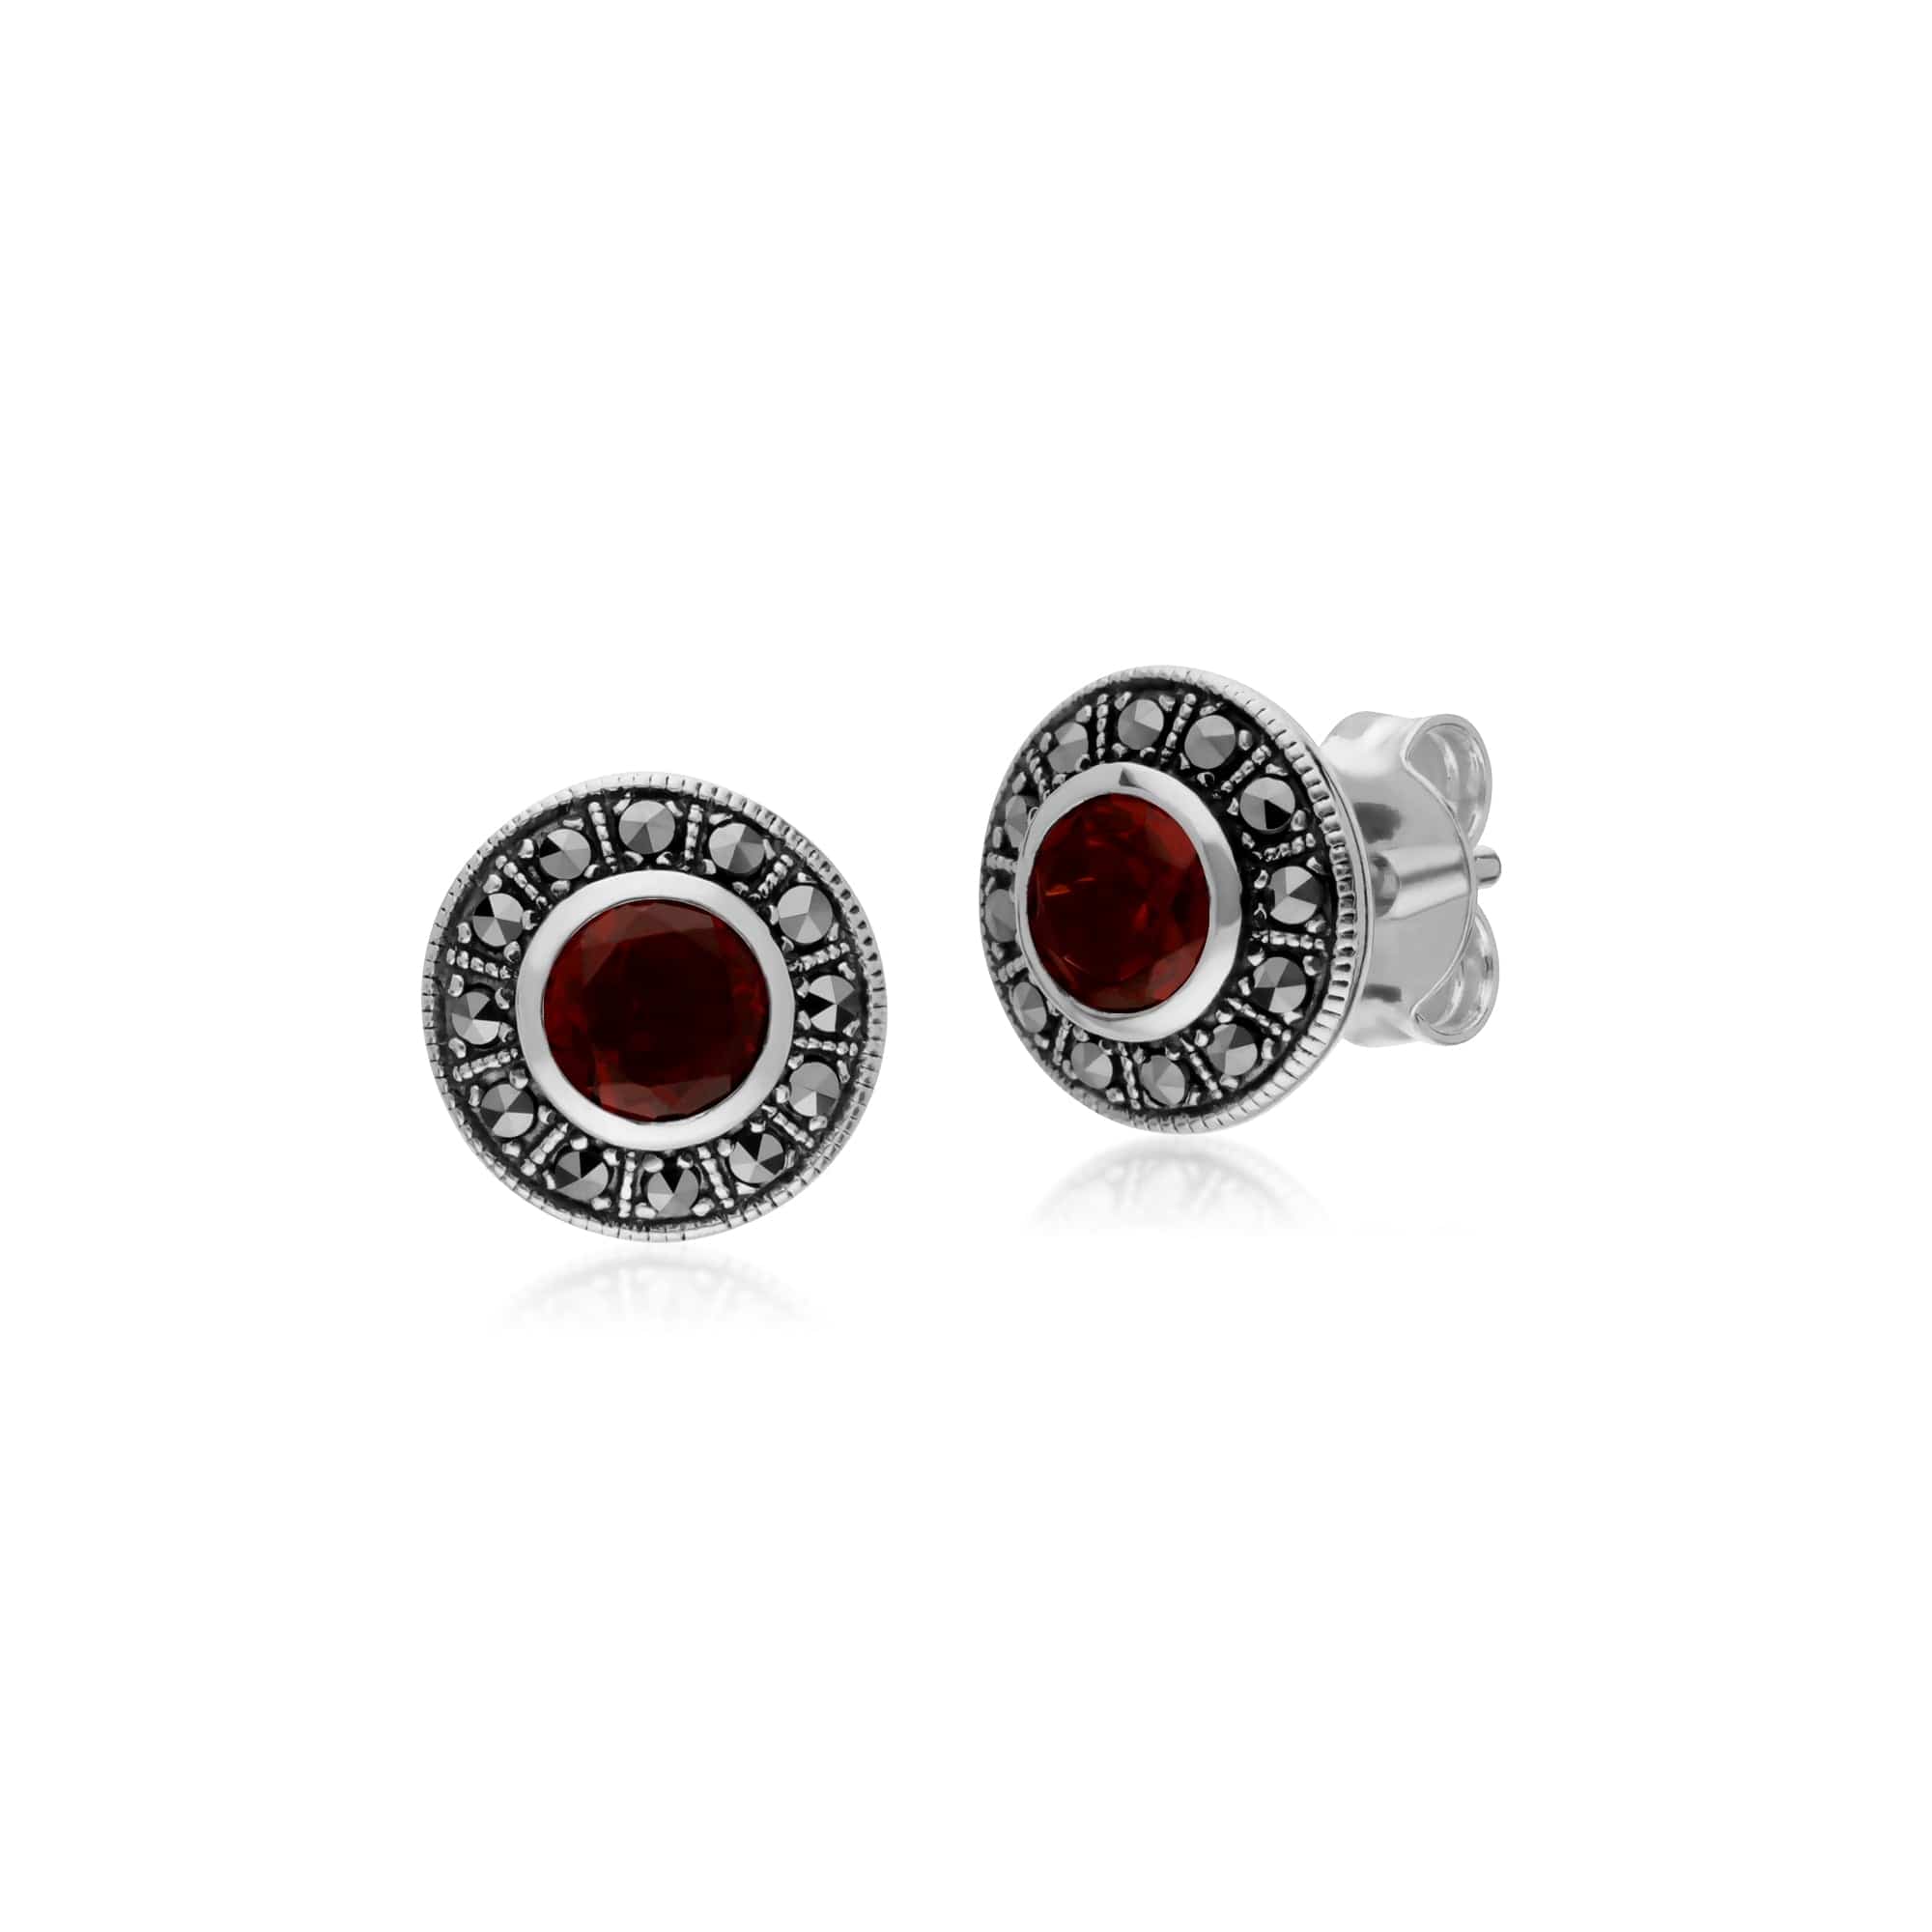 214E872703925-214R605603925 Art Deco Style Round Garnet and Marcasite Cluster Stud Earrings & Ring Set in 925 Sterling Silver 2